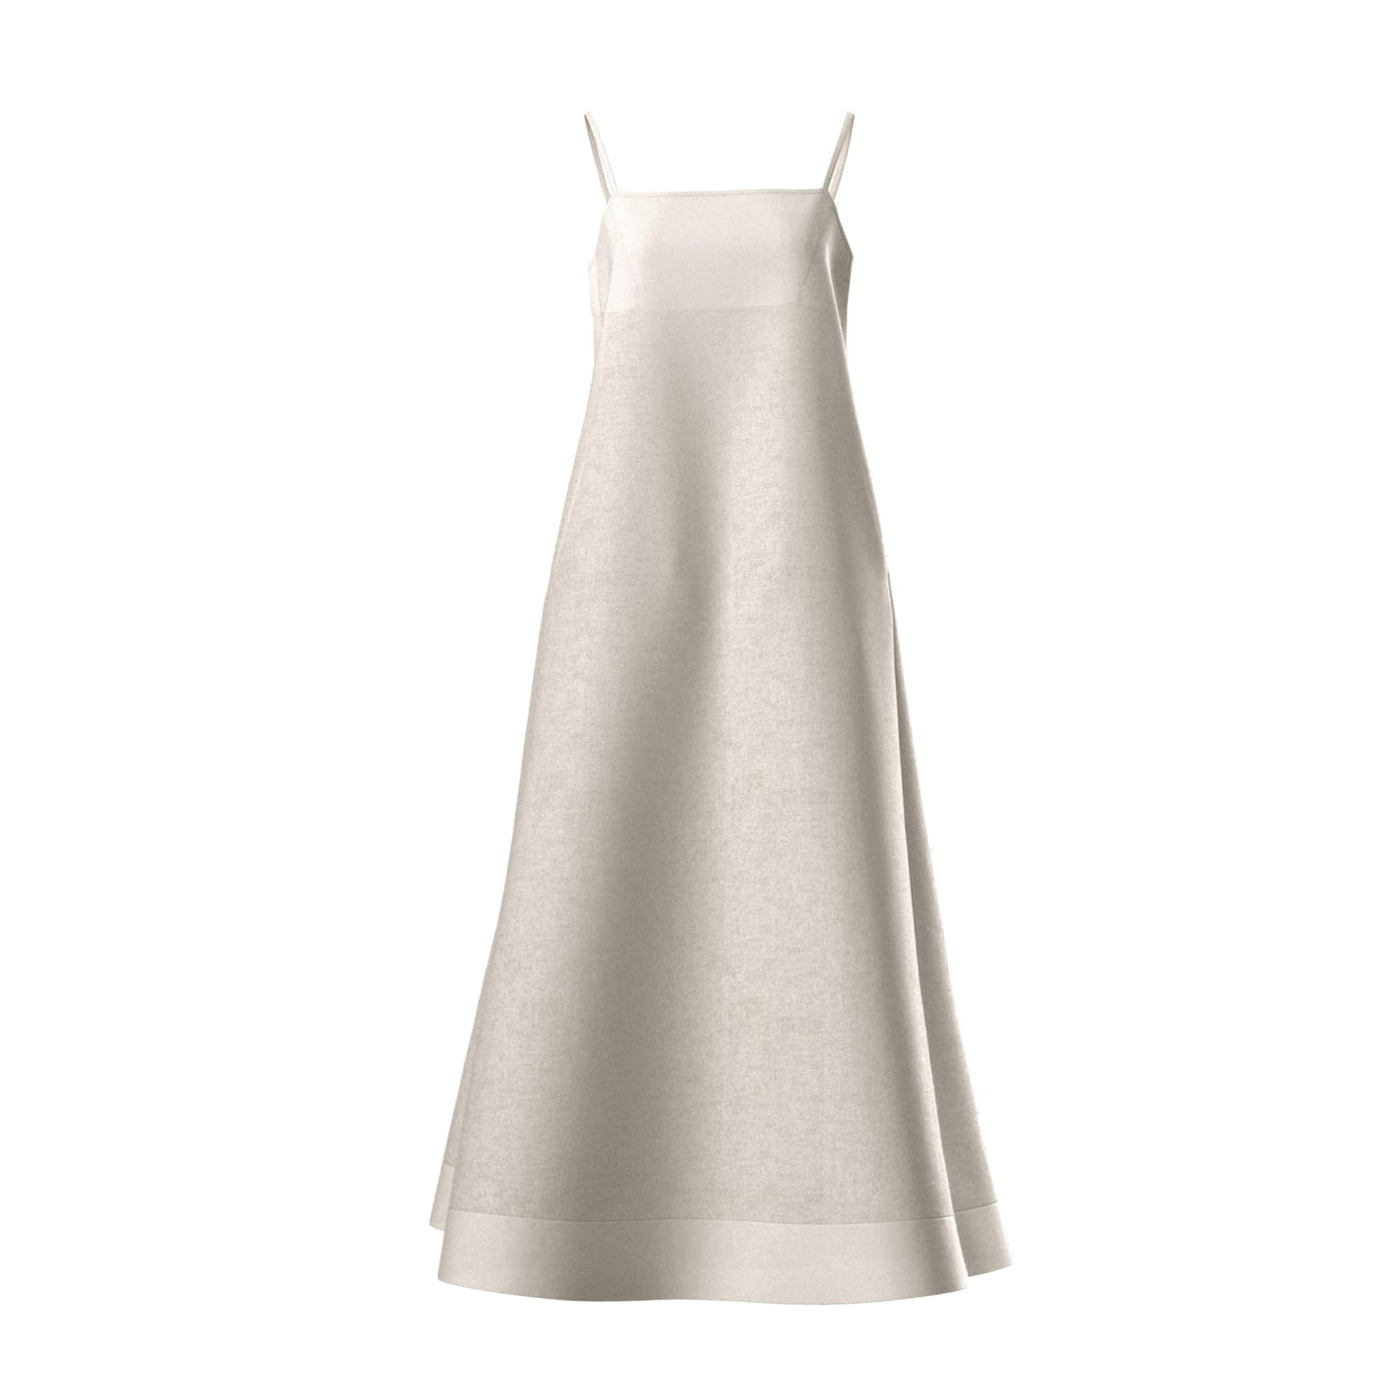 Lilly Pilly Collection 100% organic linen Coco dress in Oatmeal as 3D model showing front view